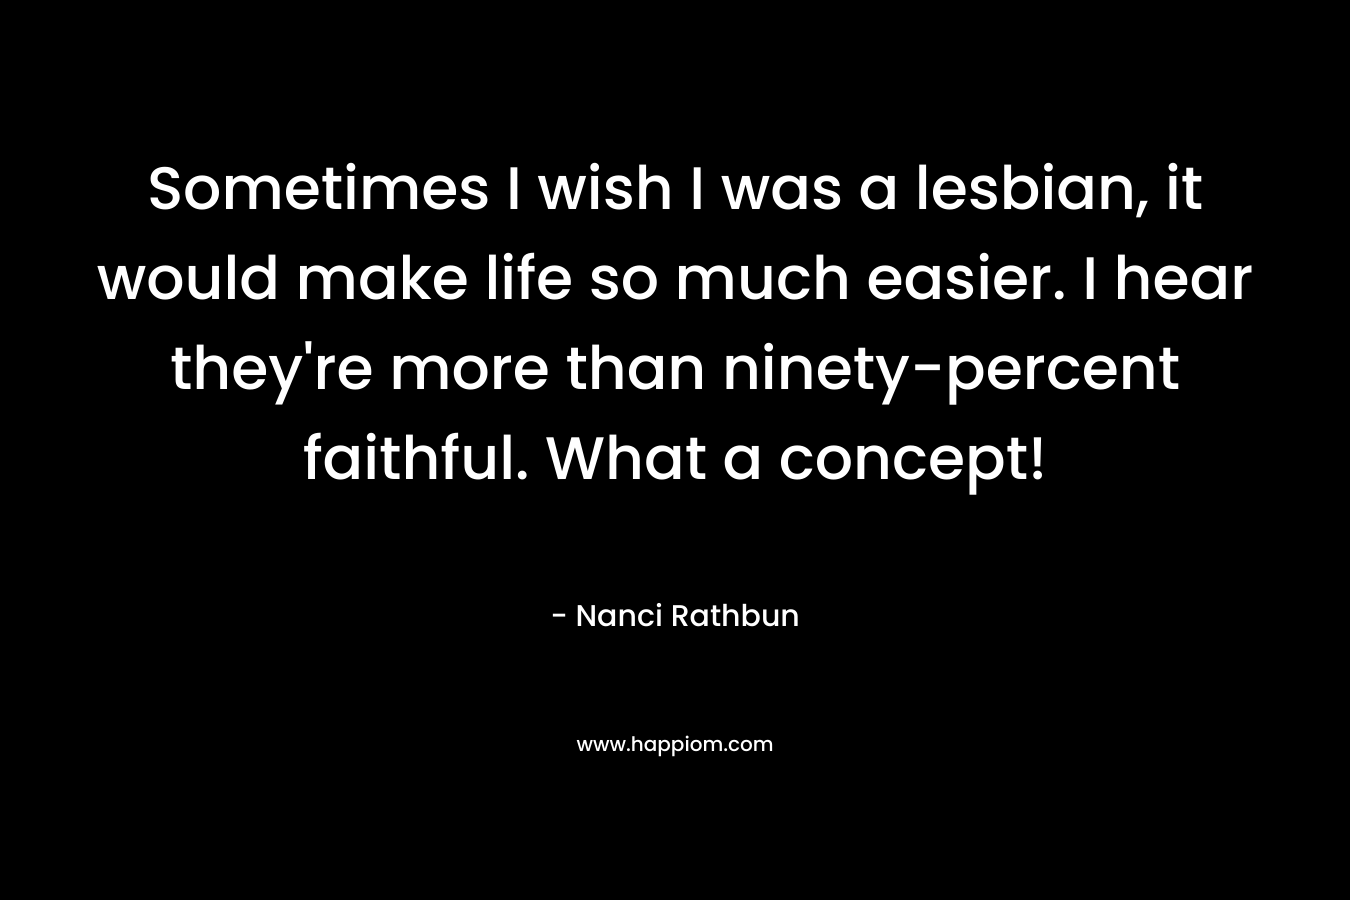 Sometimes I wish I was a lesbian, it would make life so much easier. I hear they’re more than ninety-percent faithful. What a concept! – Nanci Rathbun